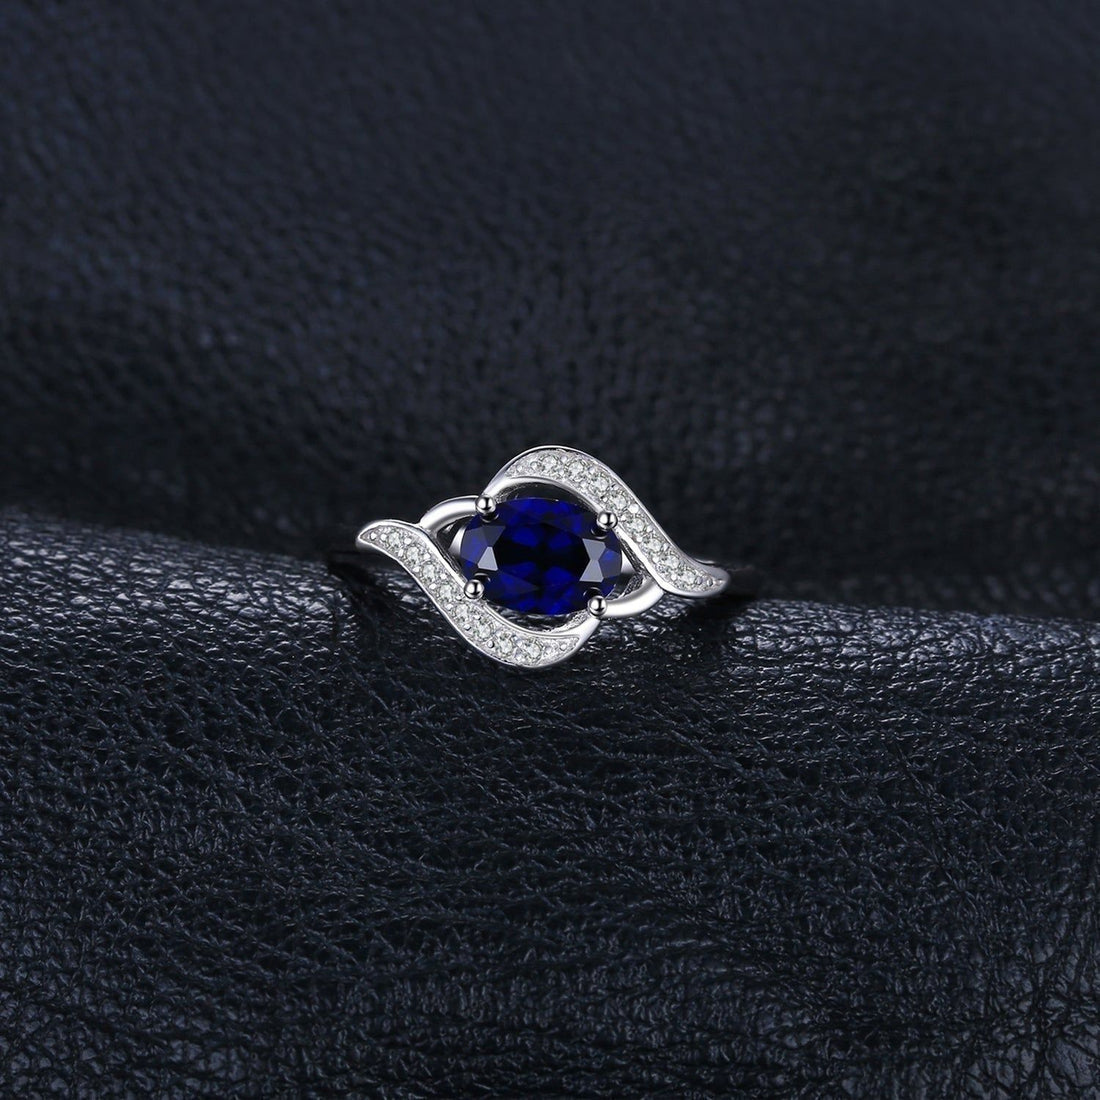 925 Sterling Silver Finger Rings Charm Jewelry JOS0407 Blue Oval Gemstone - Touchy Style .